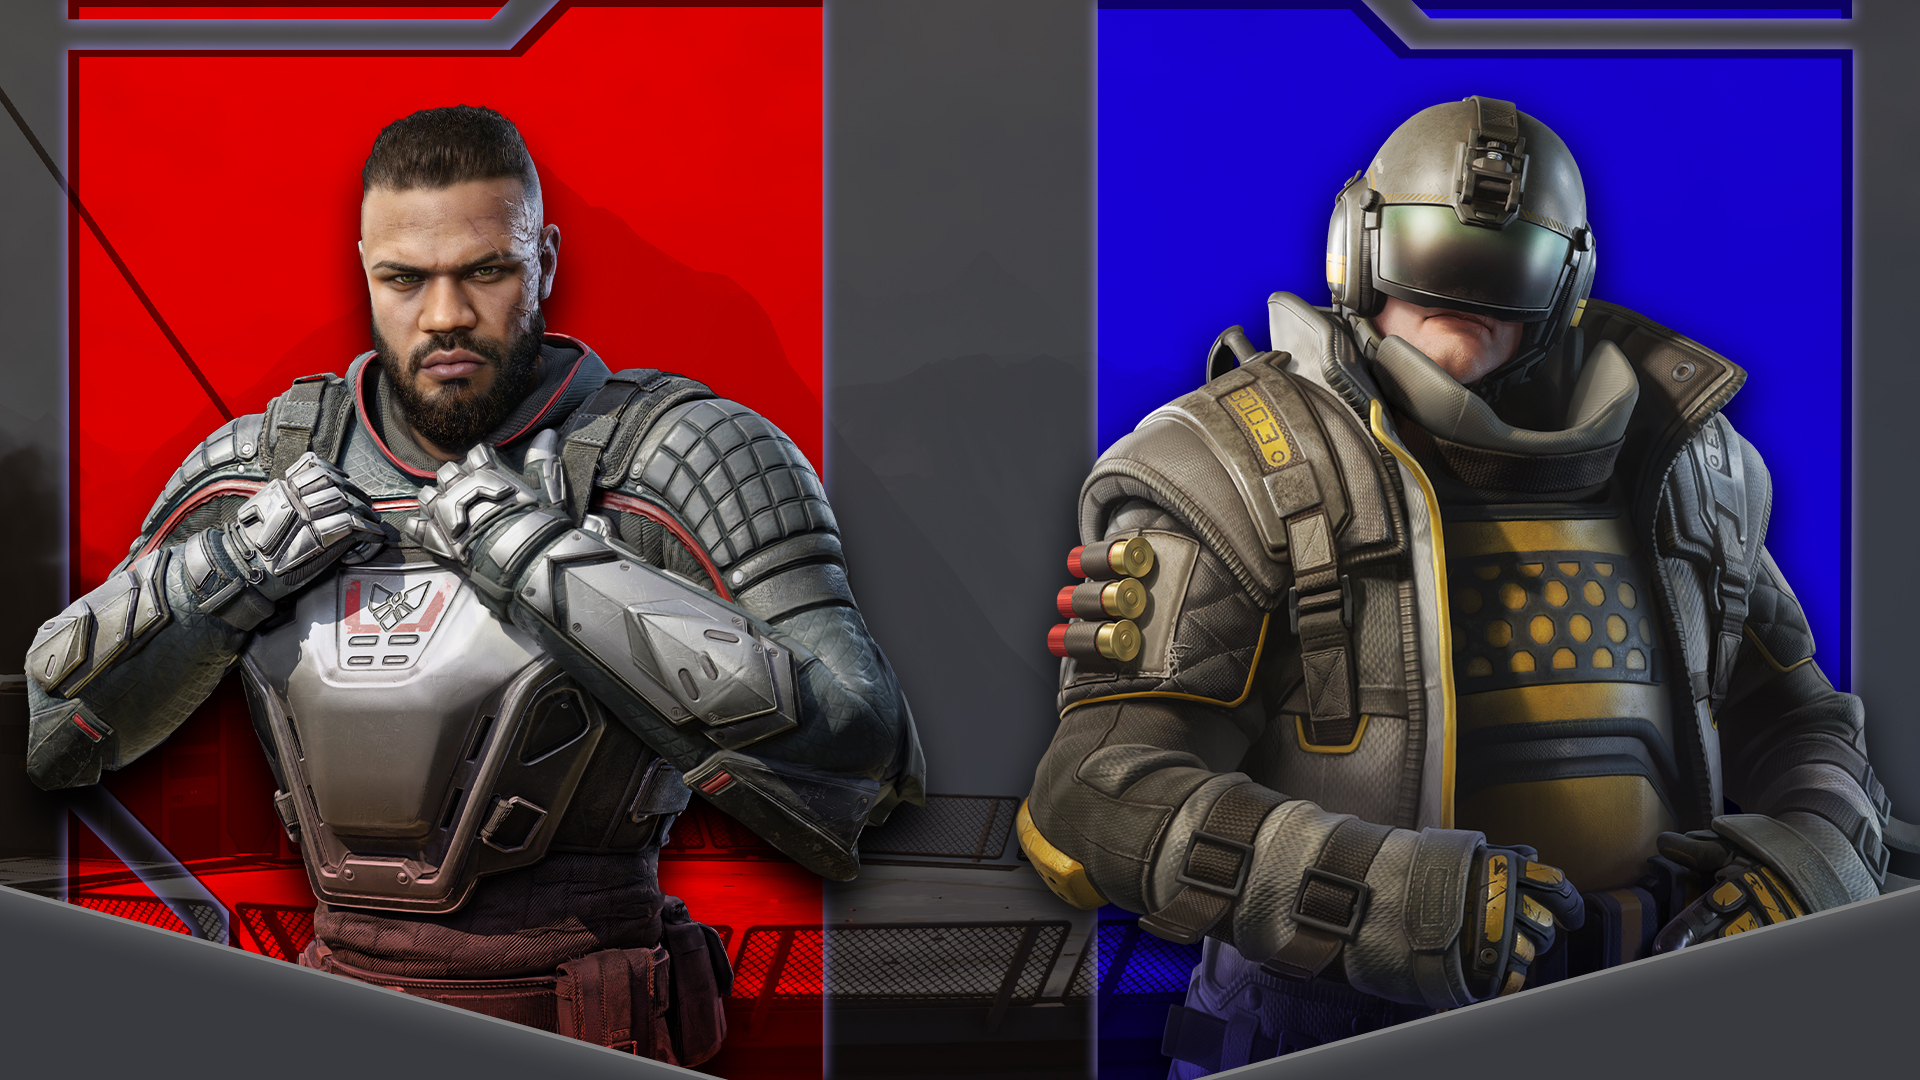 Rogue Company Elite, the mobile version, is coming soon - Jaxon